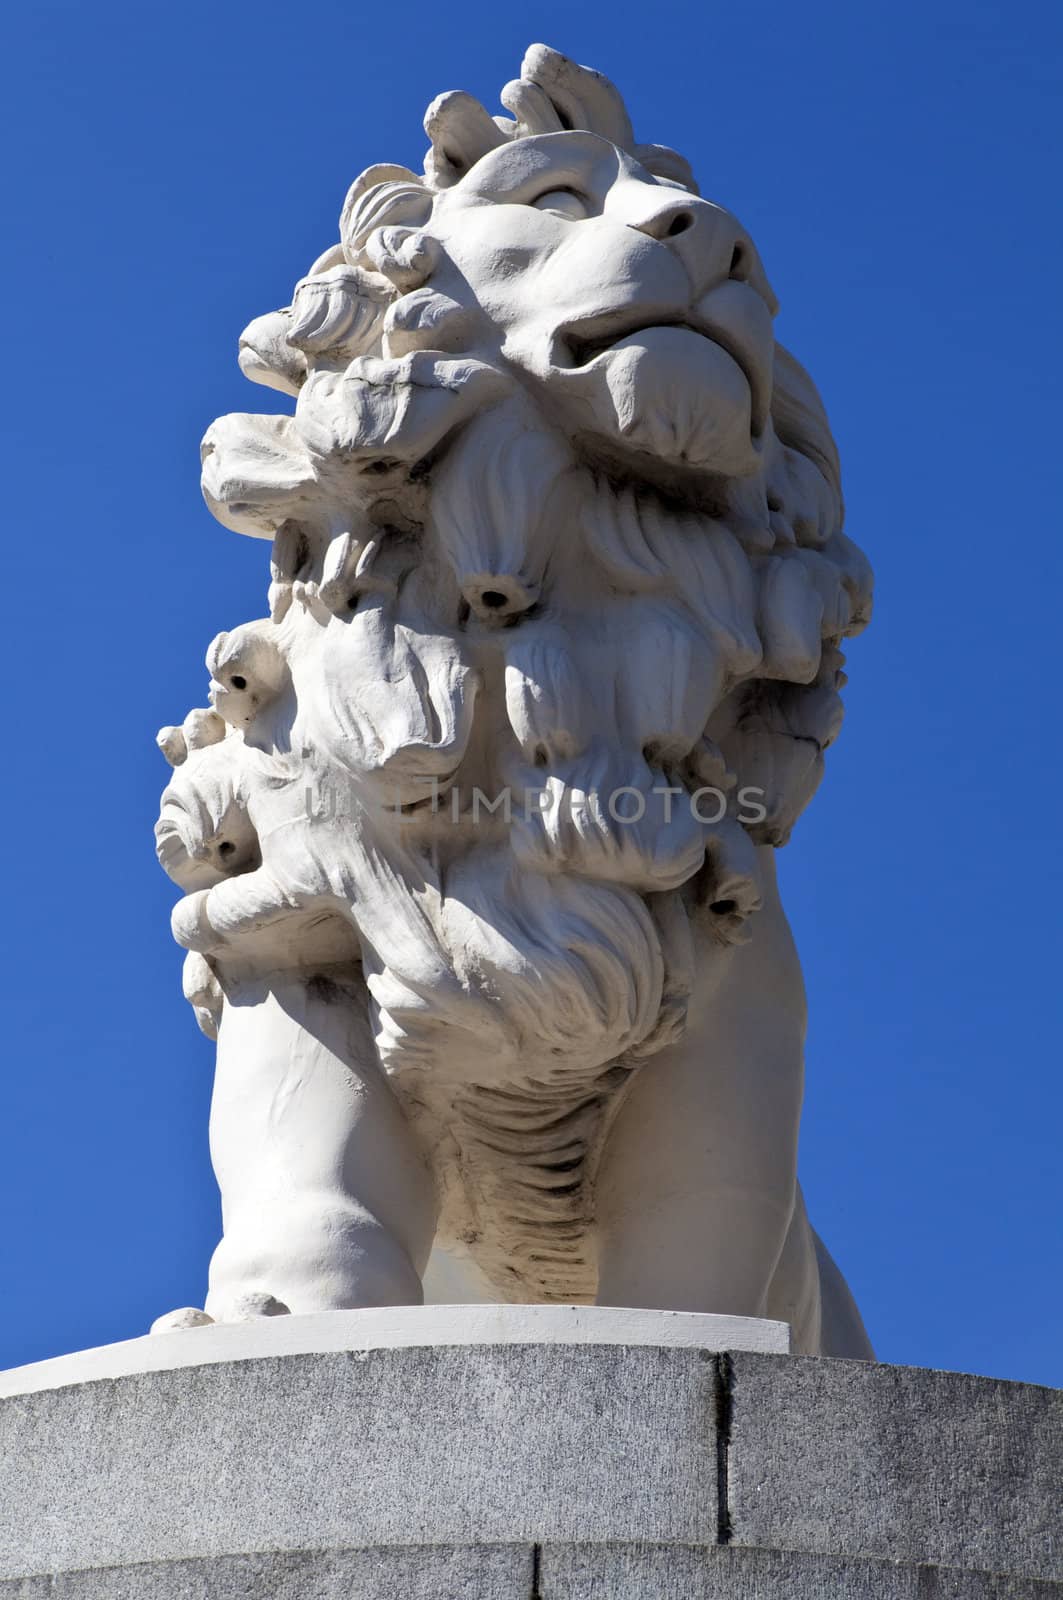 A statue of a Lion made from Coade Stone located on one end of Westminster Bridge in London.